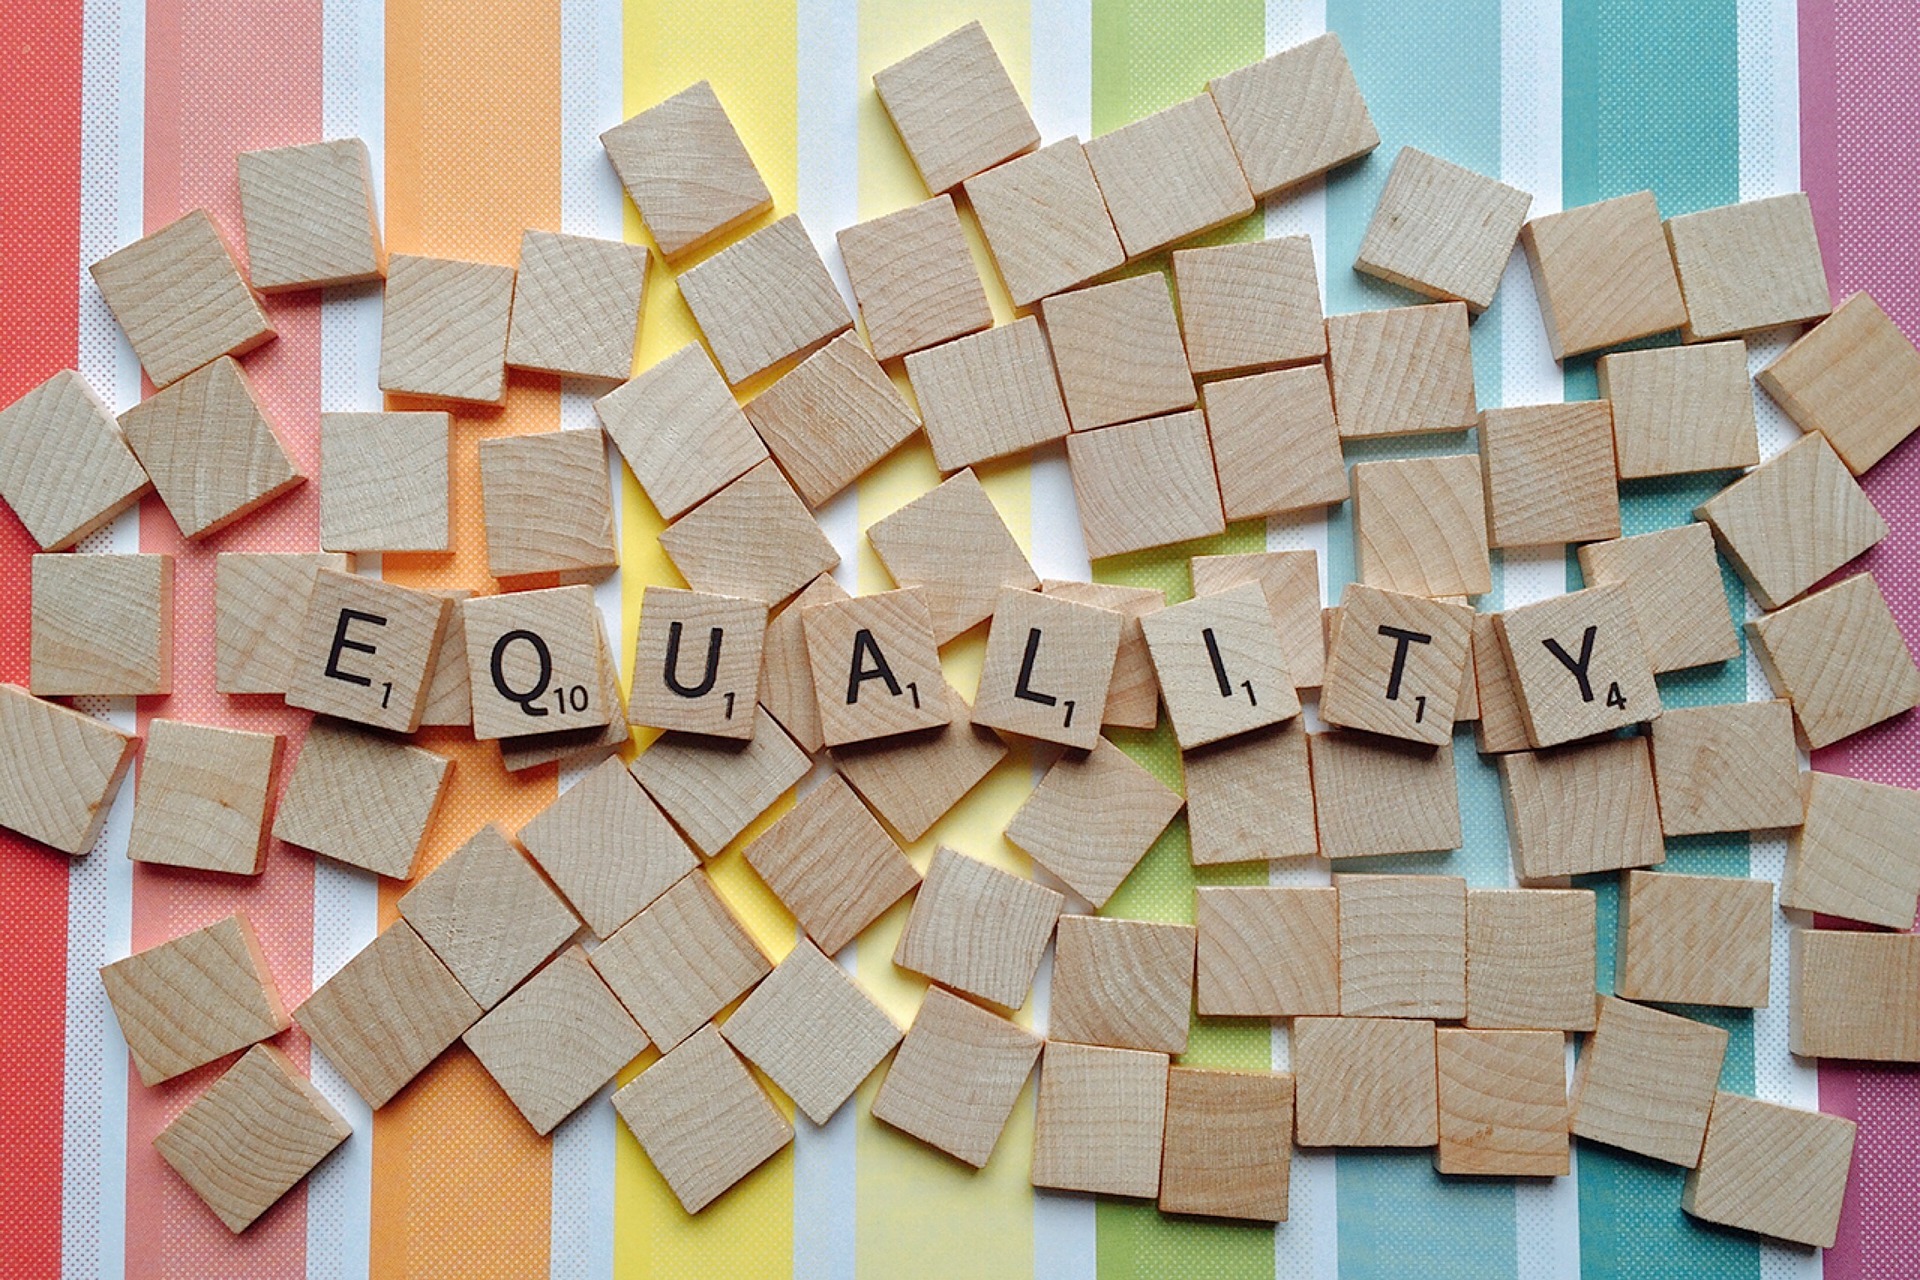 Scrabble tiles spelling out the word 'equality', on a pile on blank tiles on top of a rainbow stripe background